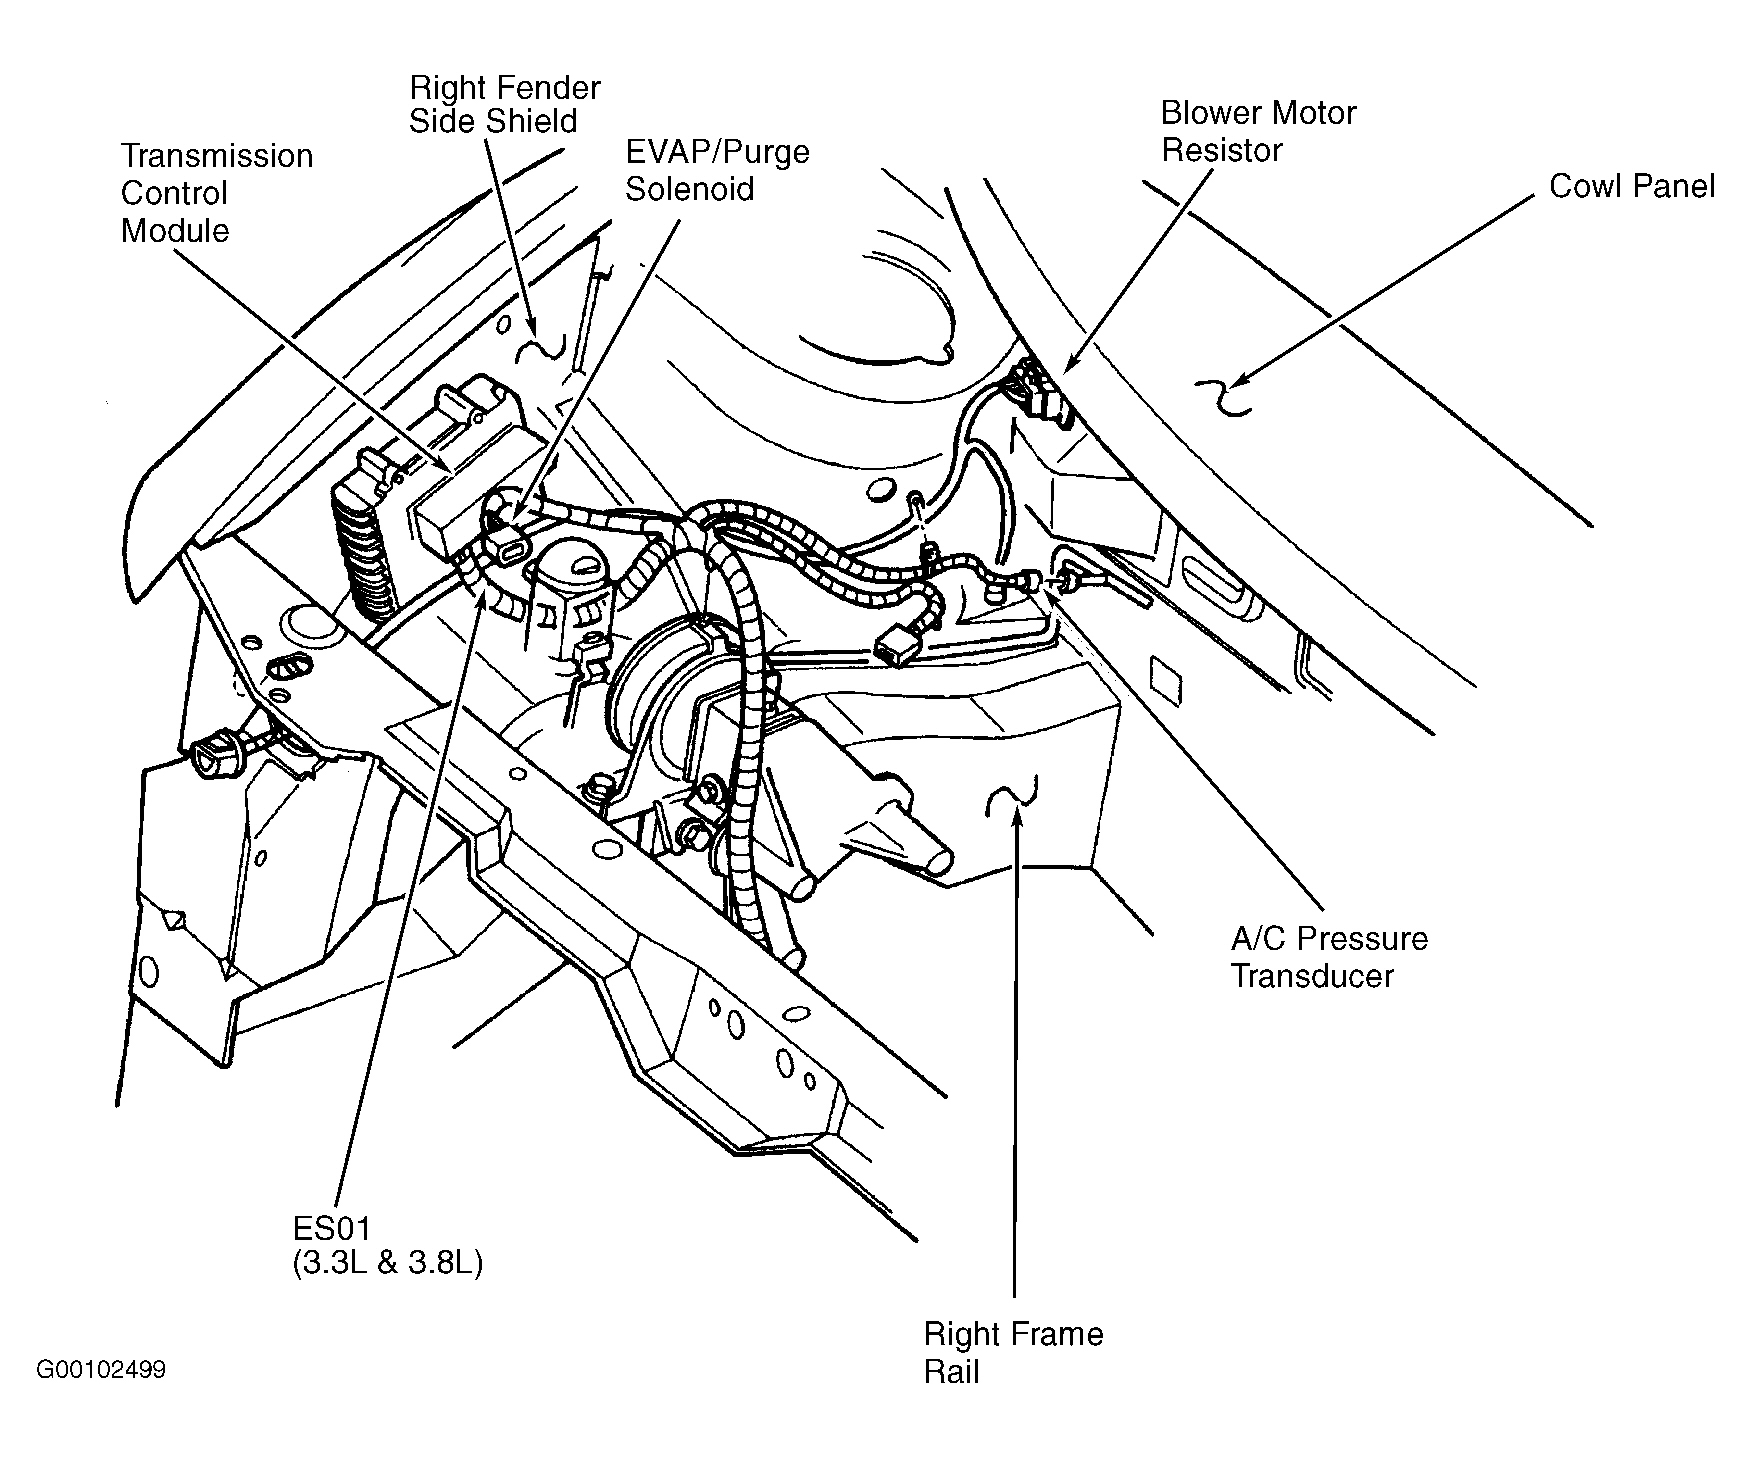 Dodge Grand Caravan LE 1996 - Component Locations -  Right Side Of Engine Compartment